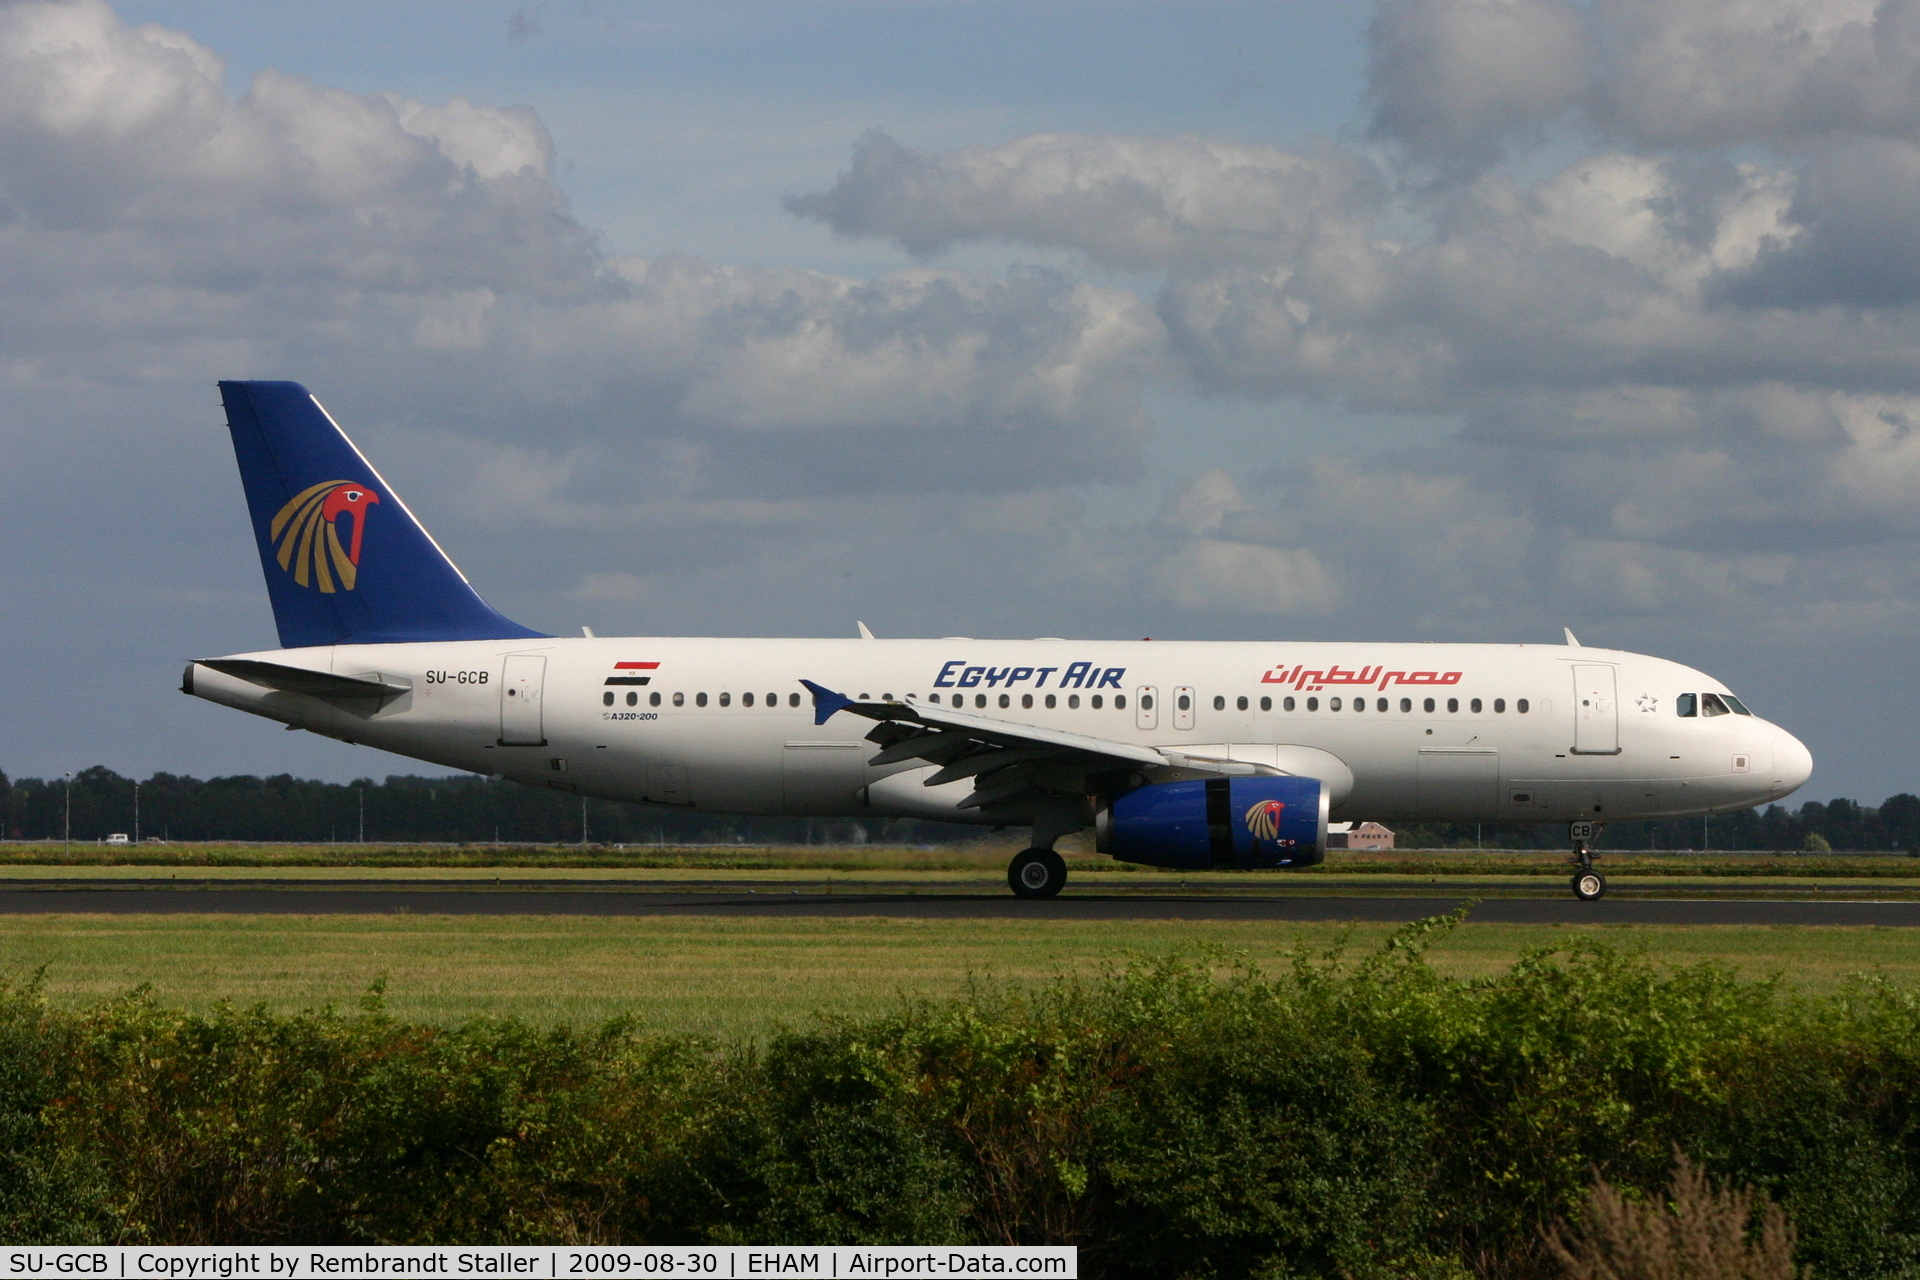 SU-GCB, 2003 Airbus A320-232 C/N 2079, Just landed on 18R at Schiphol